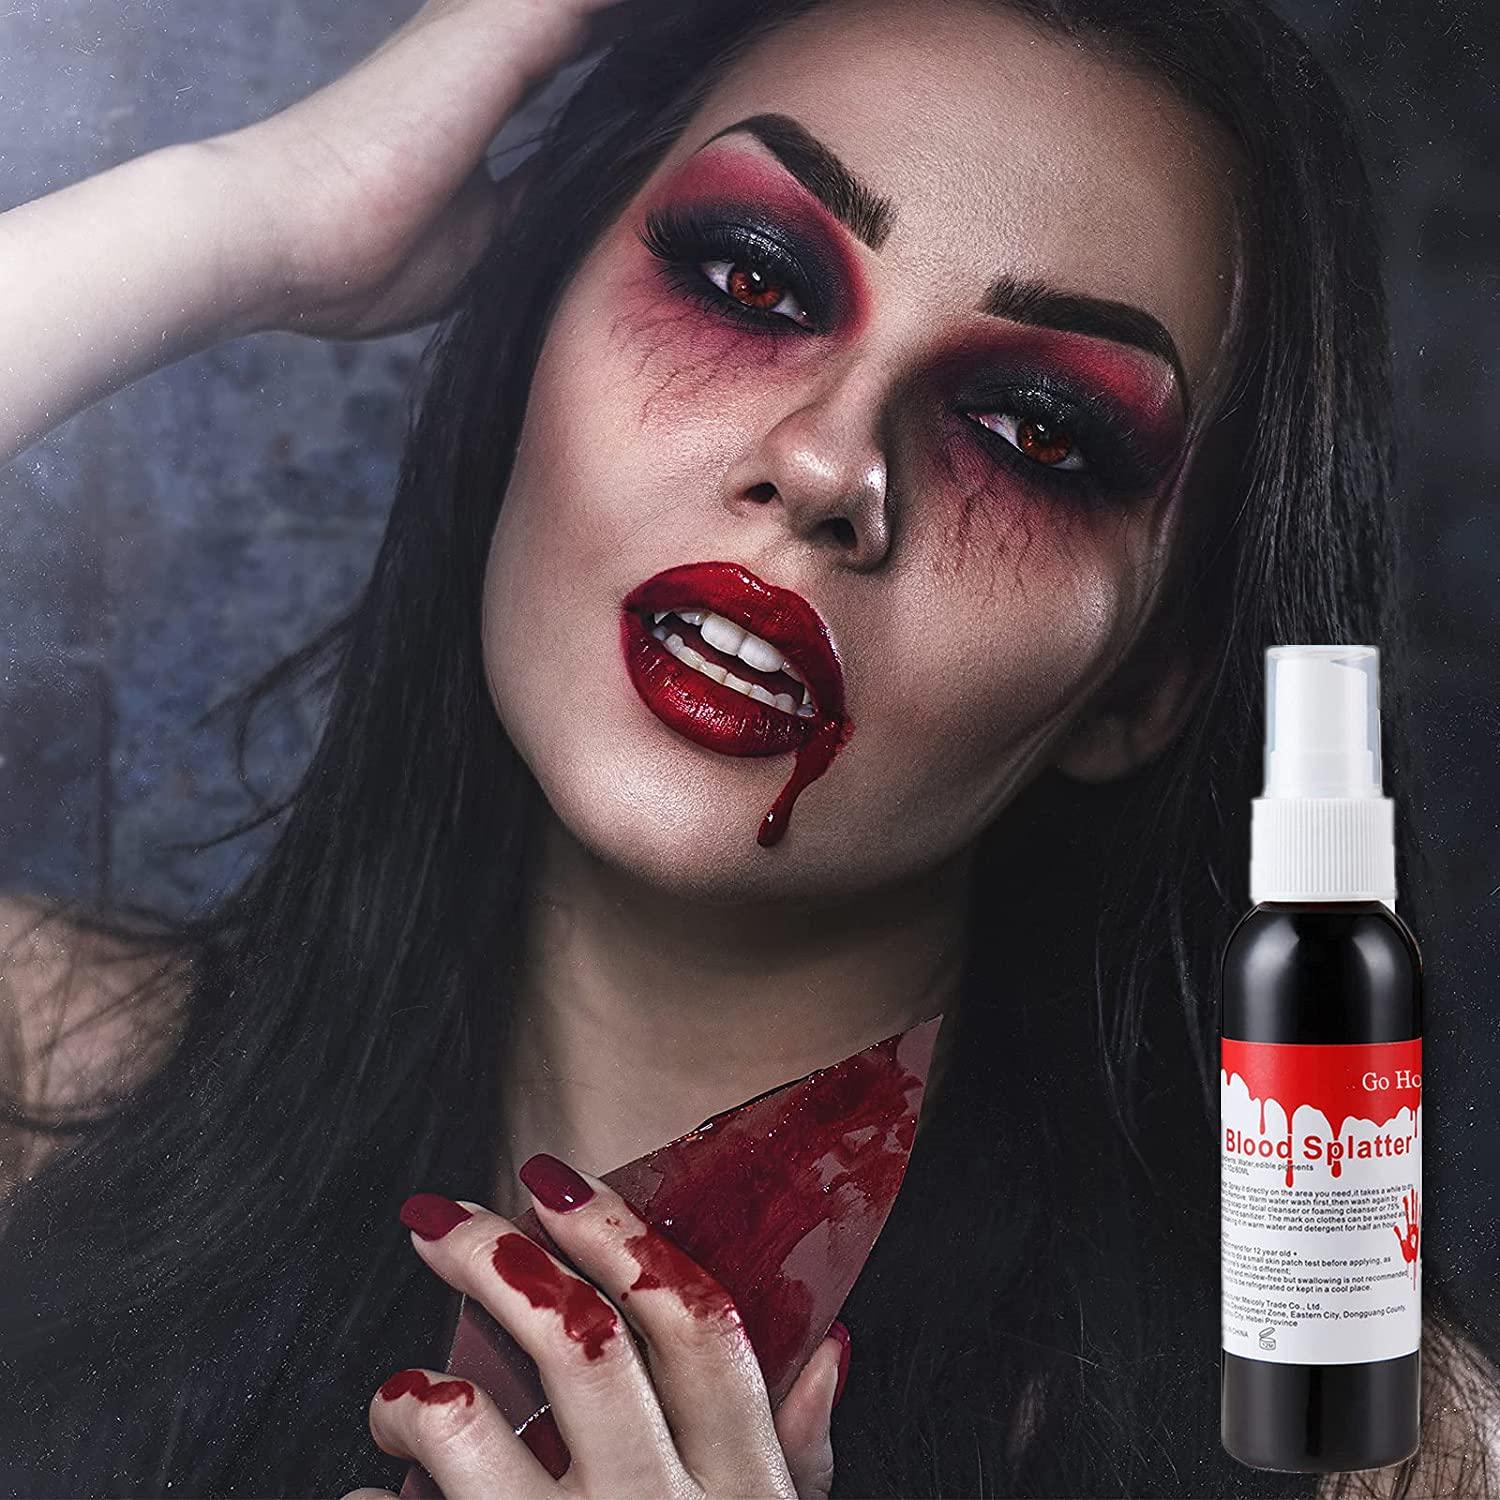 Go Ho Blood Makeup Spray 2.1Oz(60ml),Halloween Realistic Fake Blood Clothes,Blood for Zombie Monster Vampire Clown Costume Cosplay Makeup,1PC